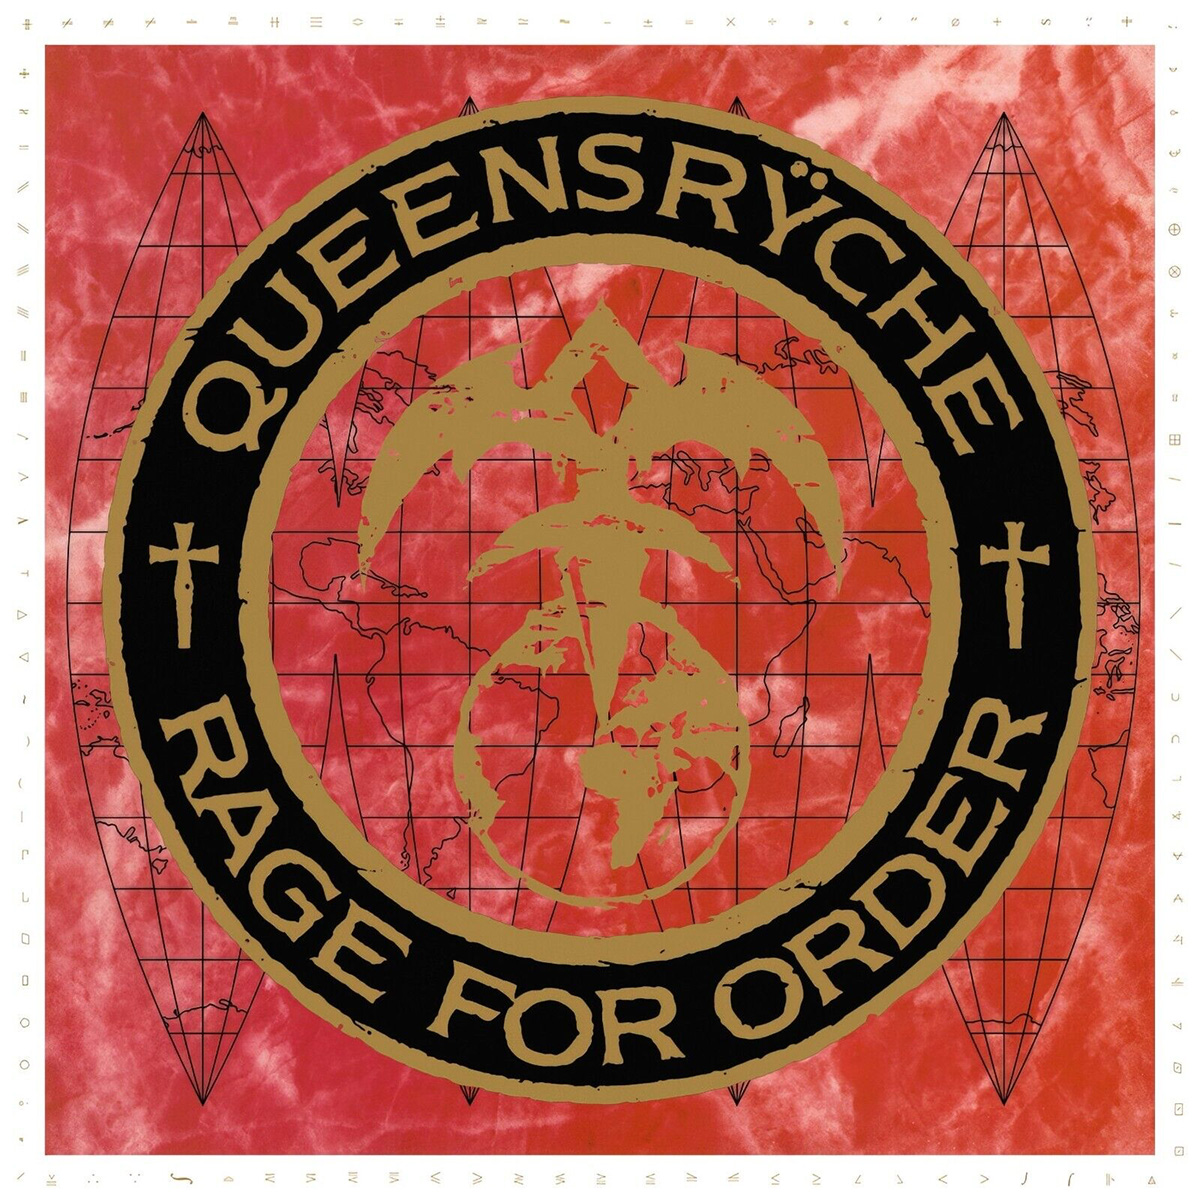 Rage for Order cd cover